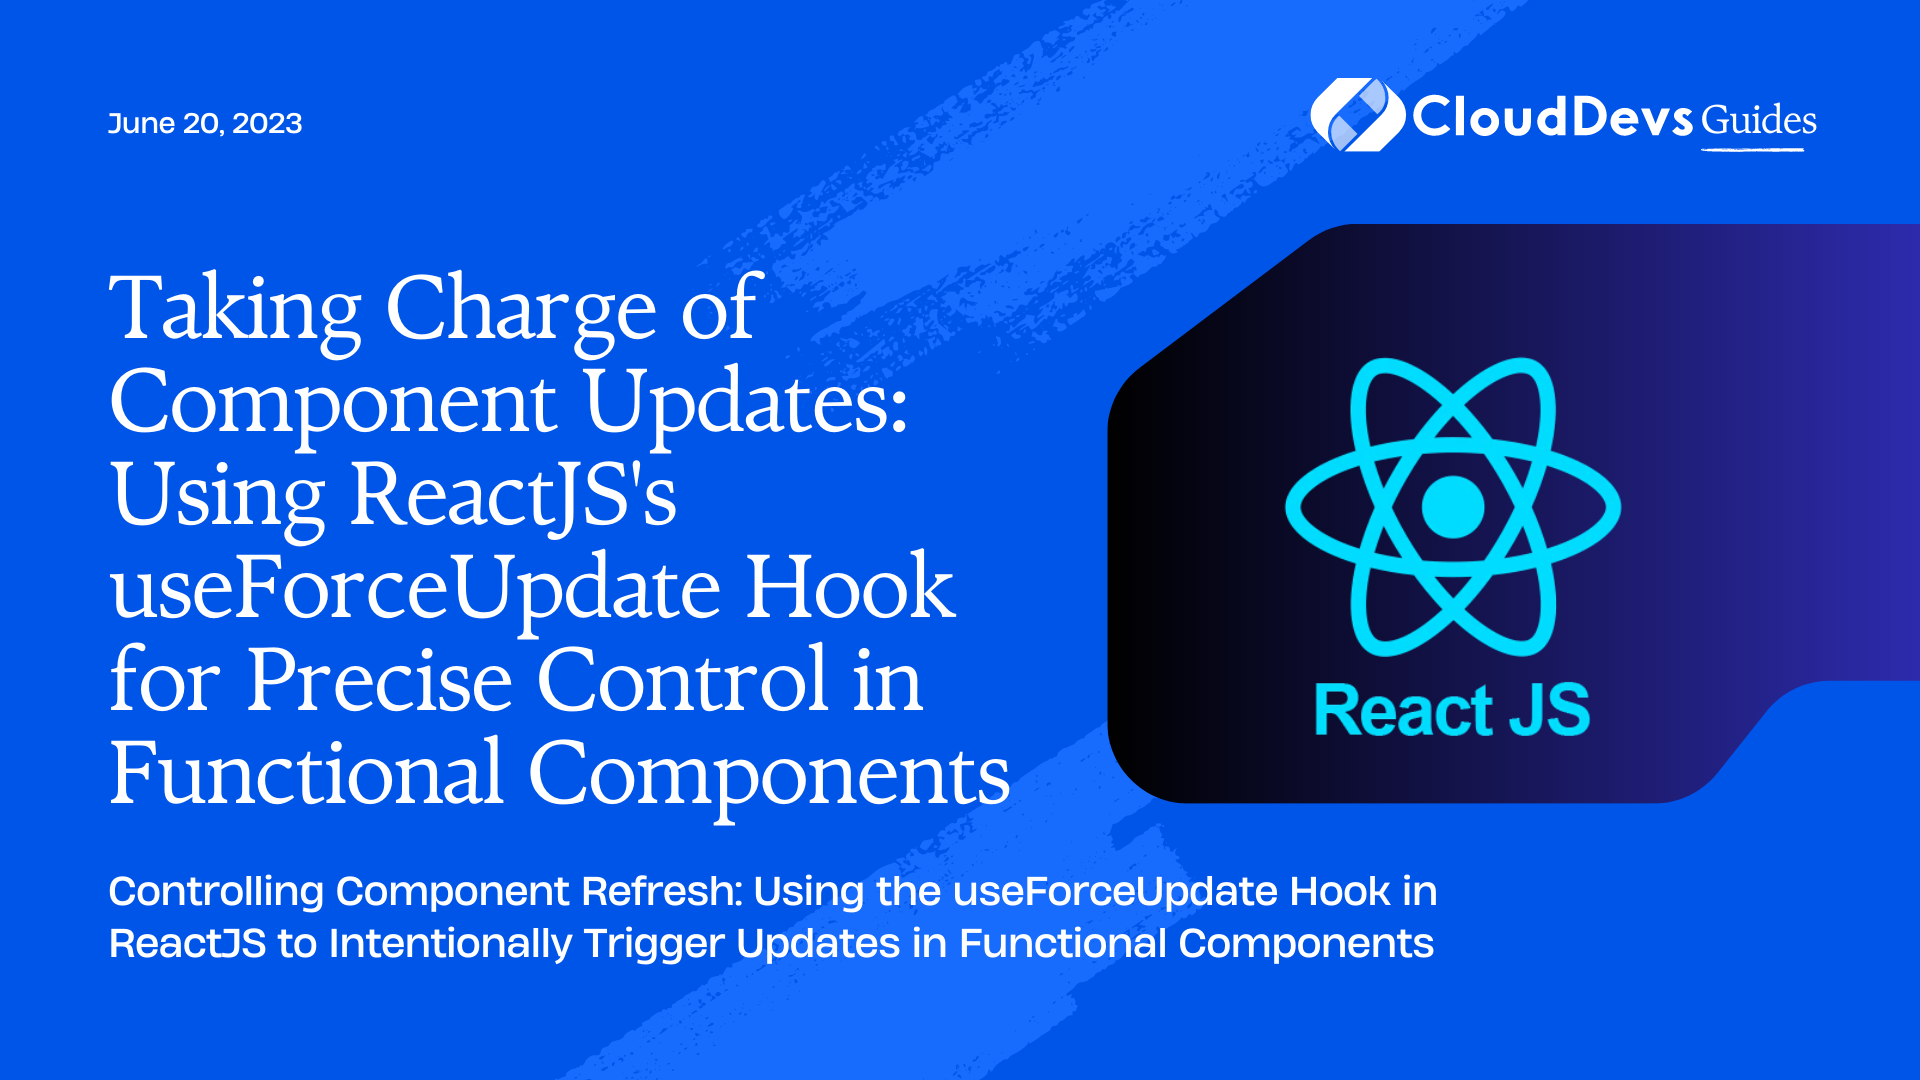 Taking Charge of Component Updates: Using ReactJS's useForceUpdate Hook for Precise Control in Functional Components